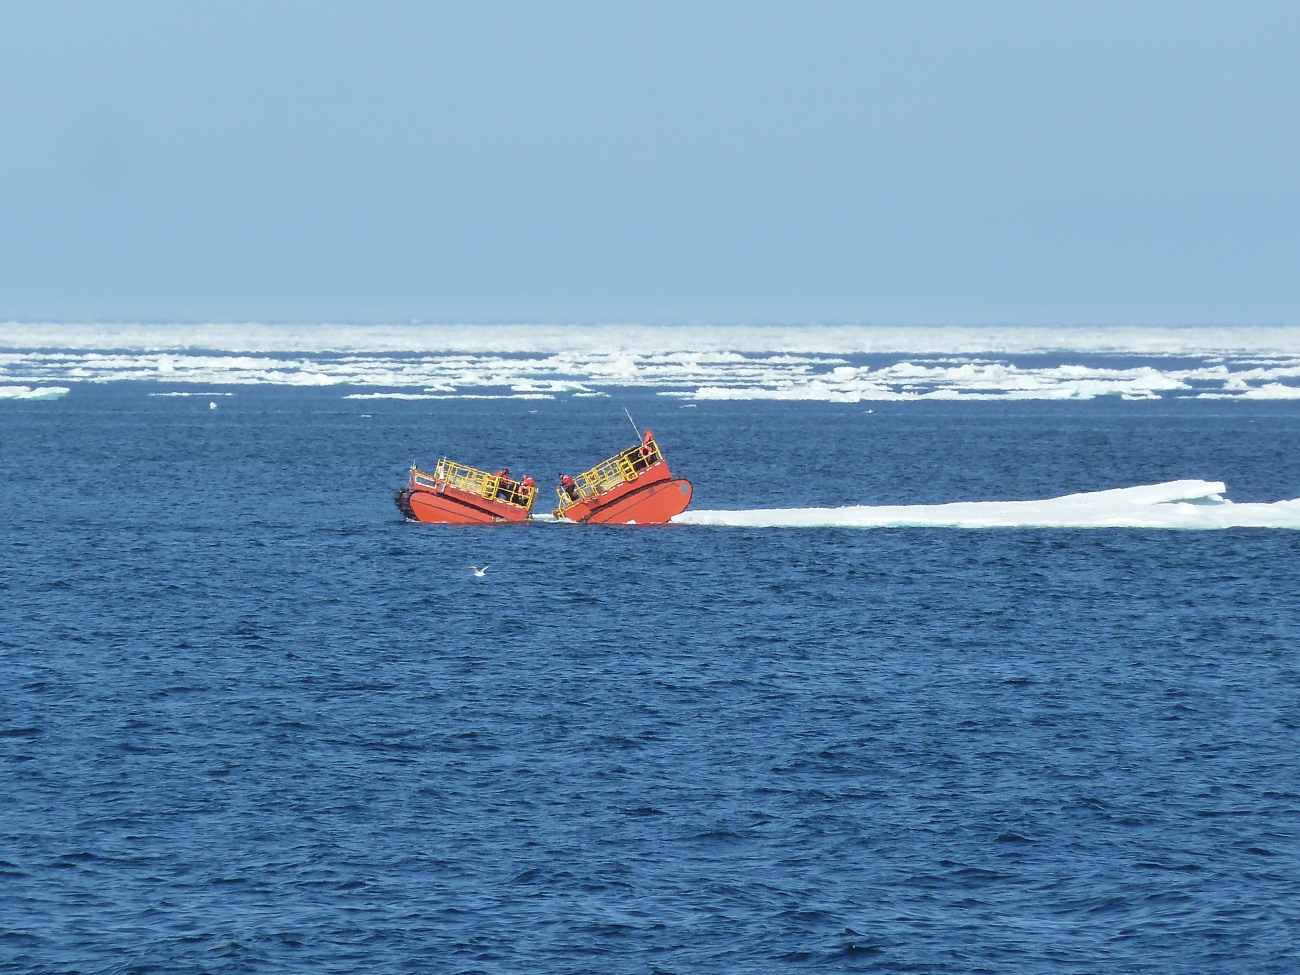 Arktos Evacuation Craft being tested by US Coast Guard north of Point Barrow